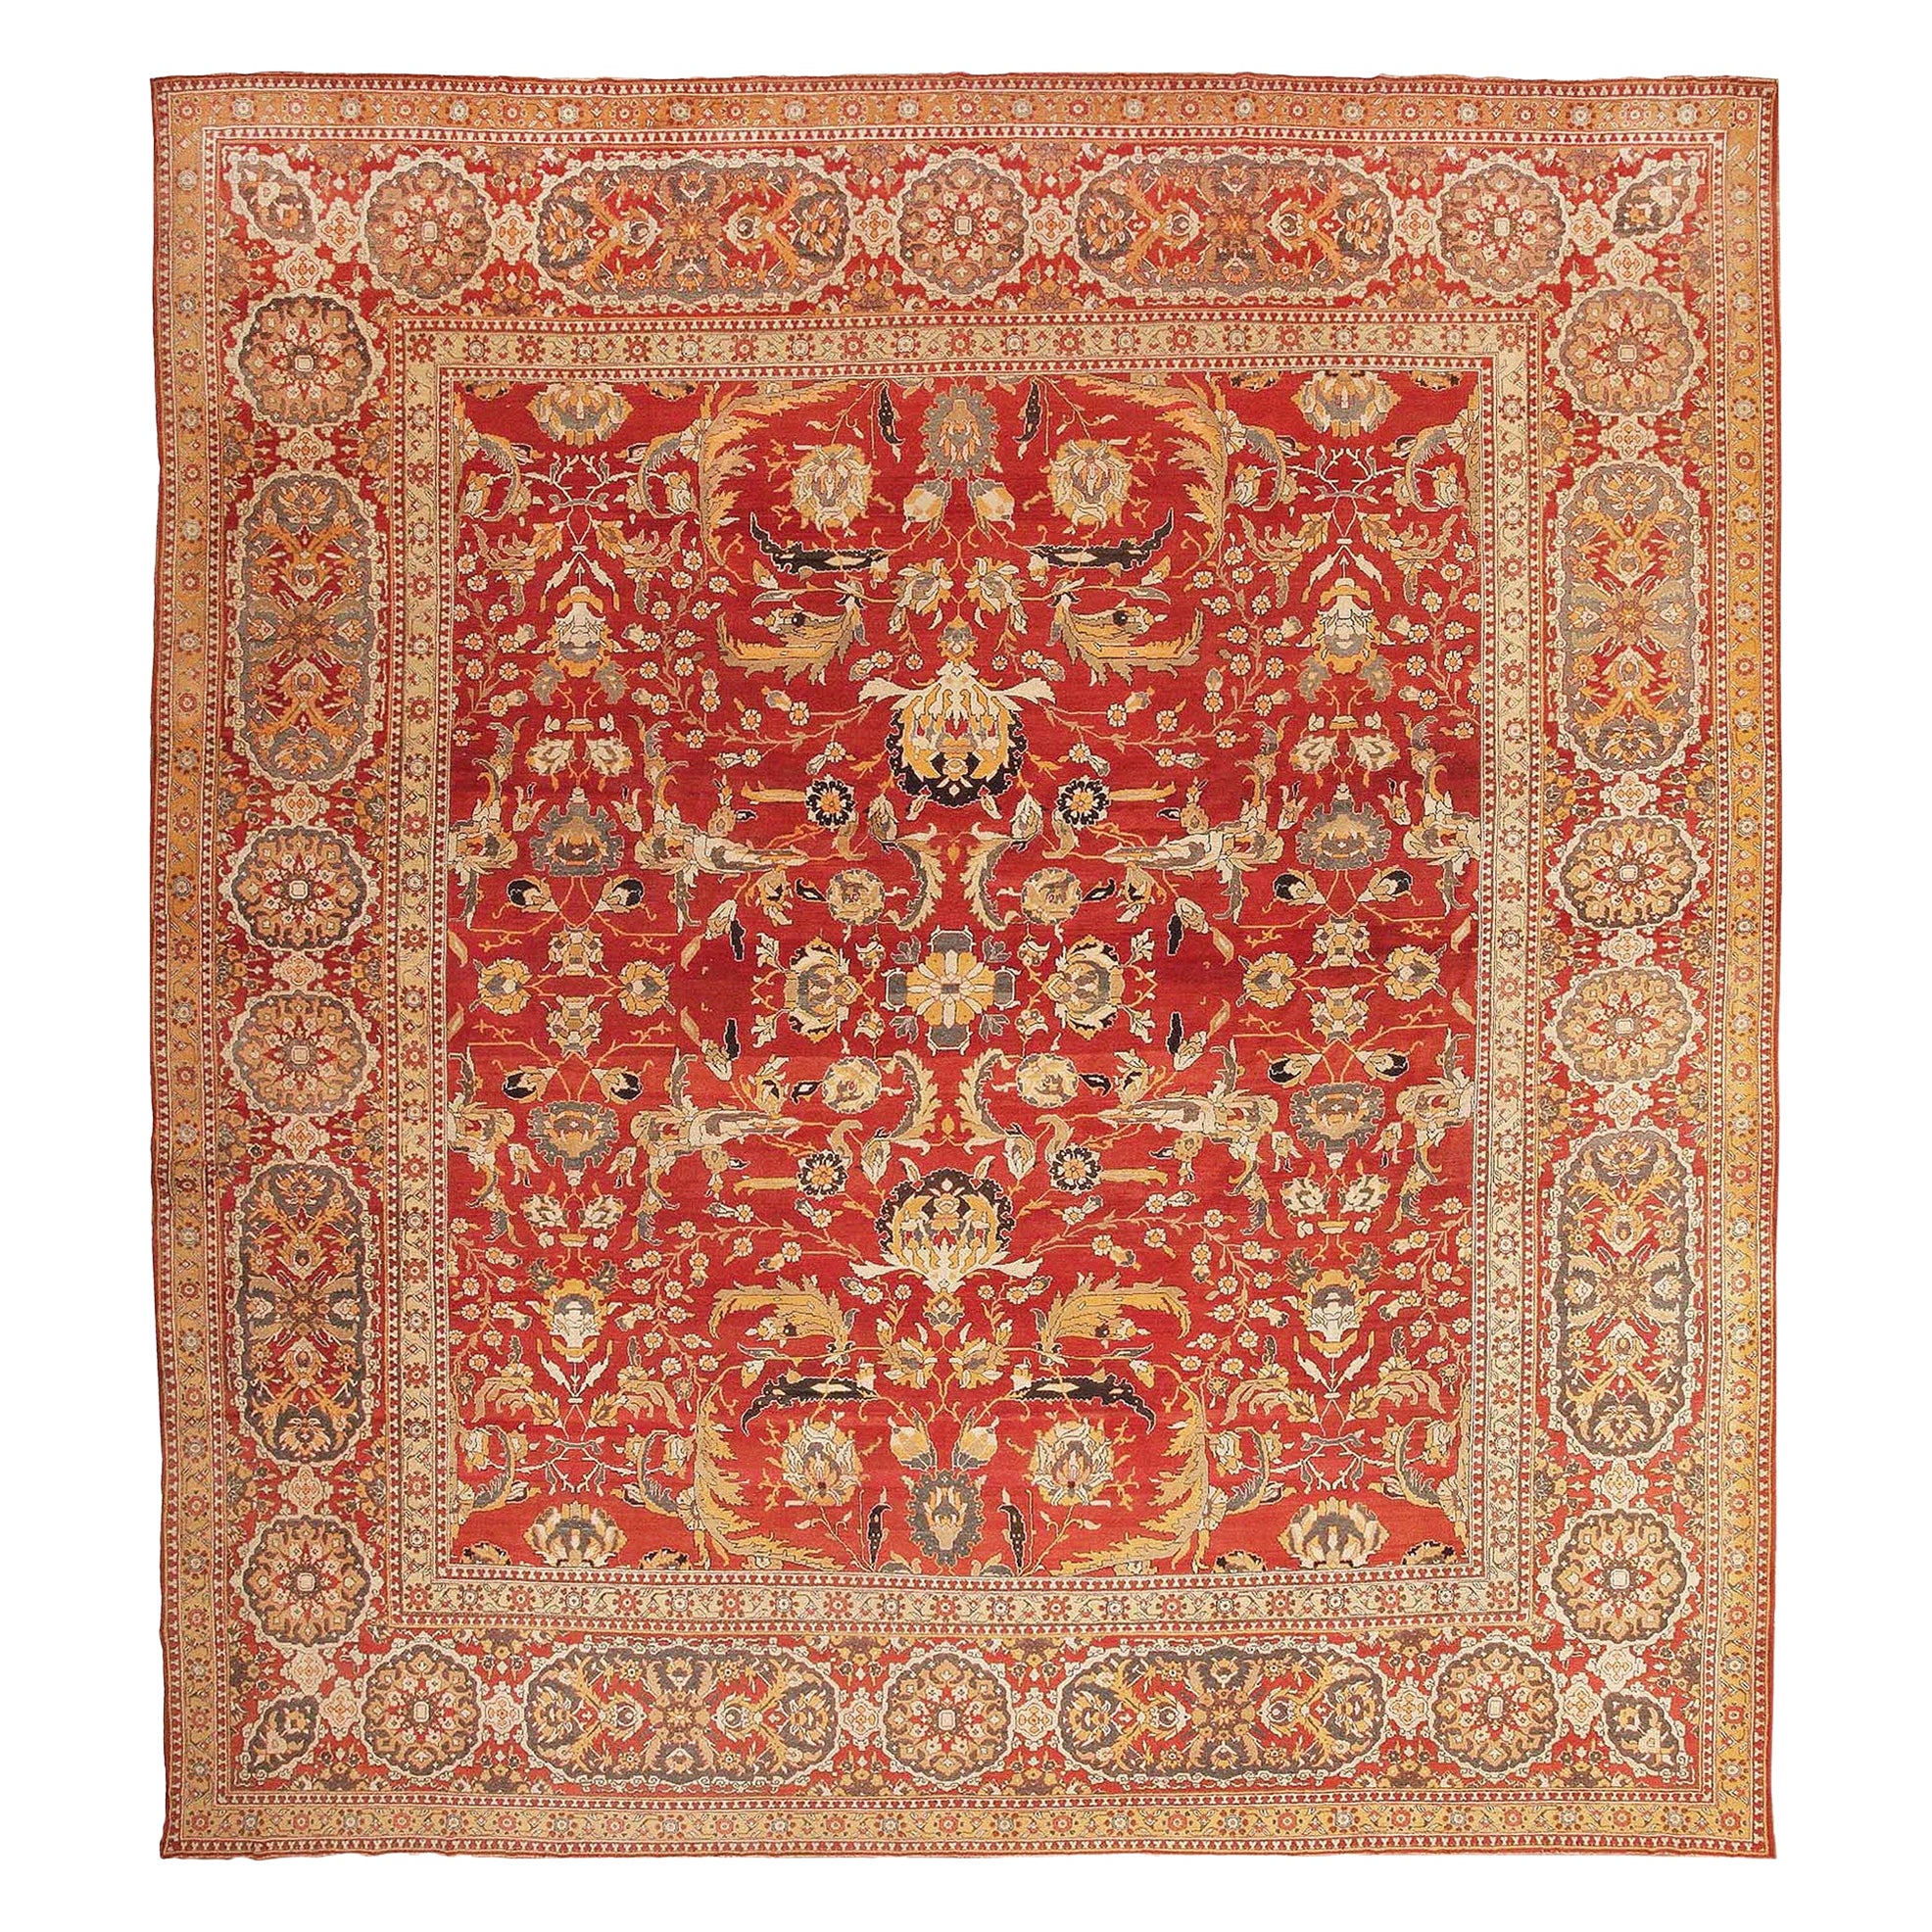 Antique Indian Agra Carpet. Size: 18 ft x 19 ft 1 in